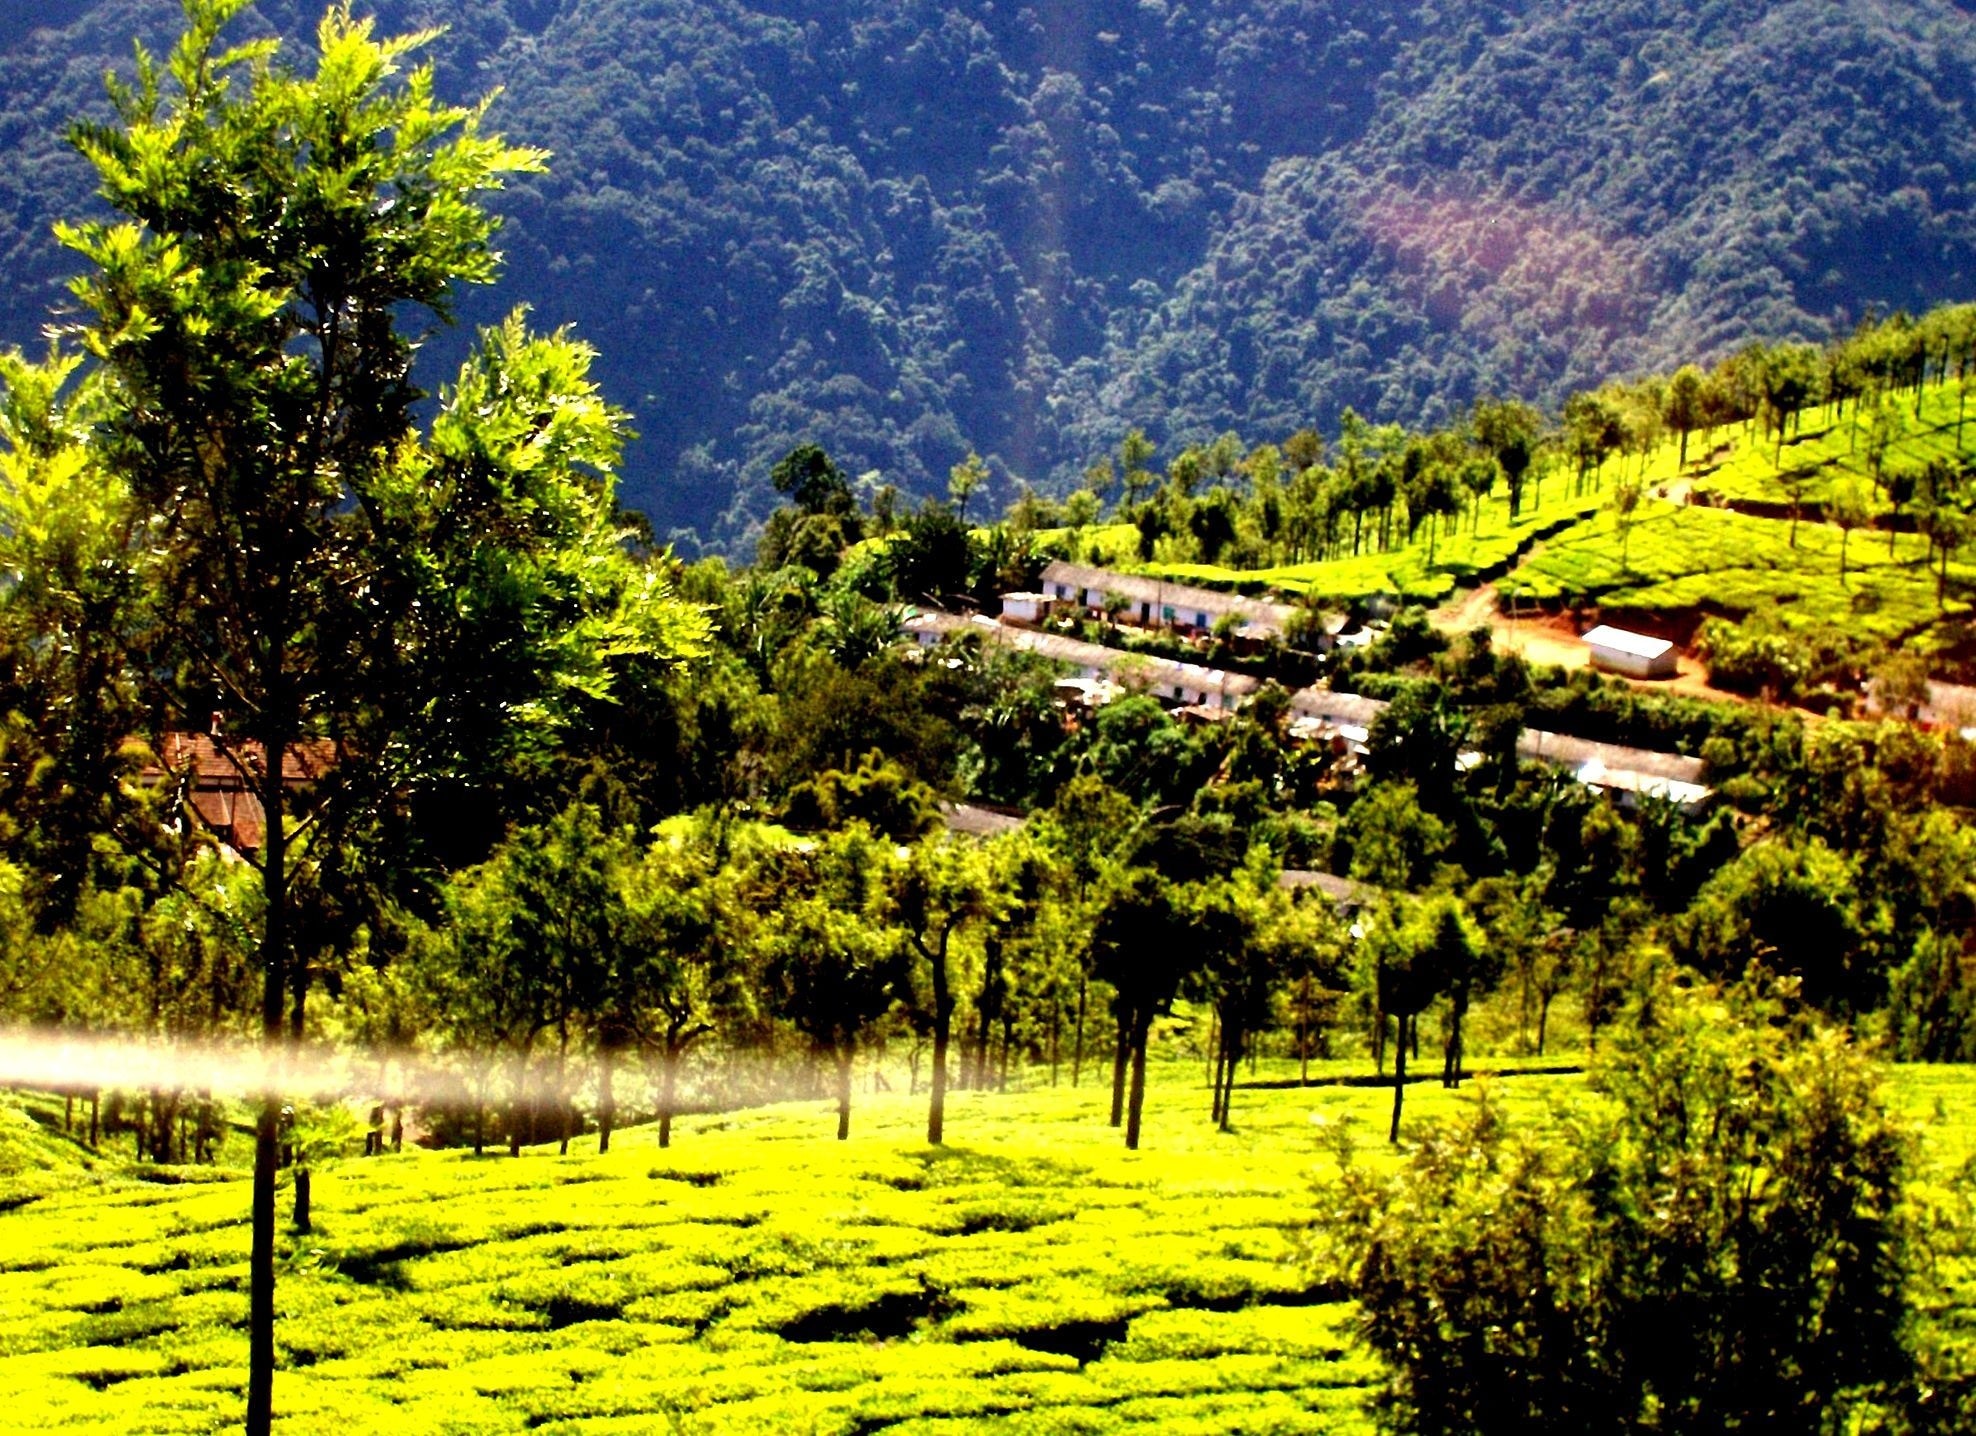 coonoor tourist places list with images